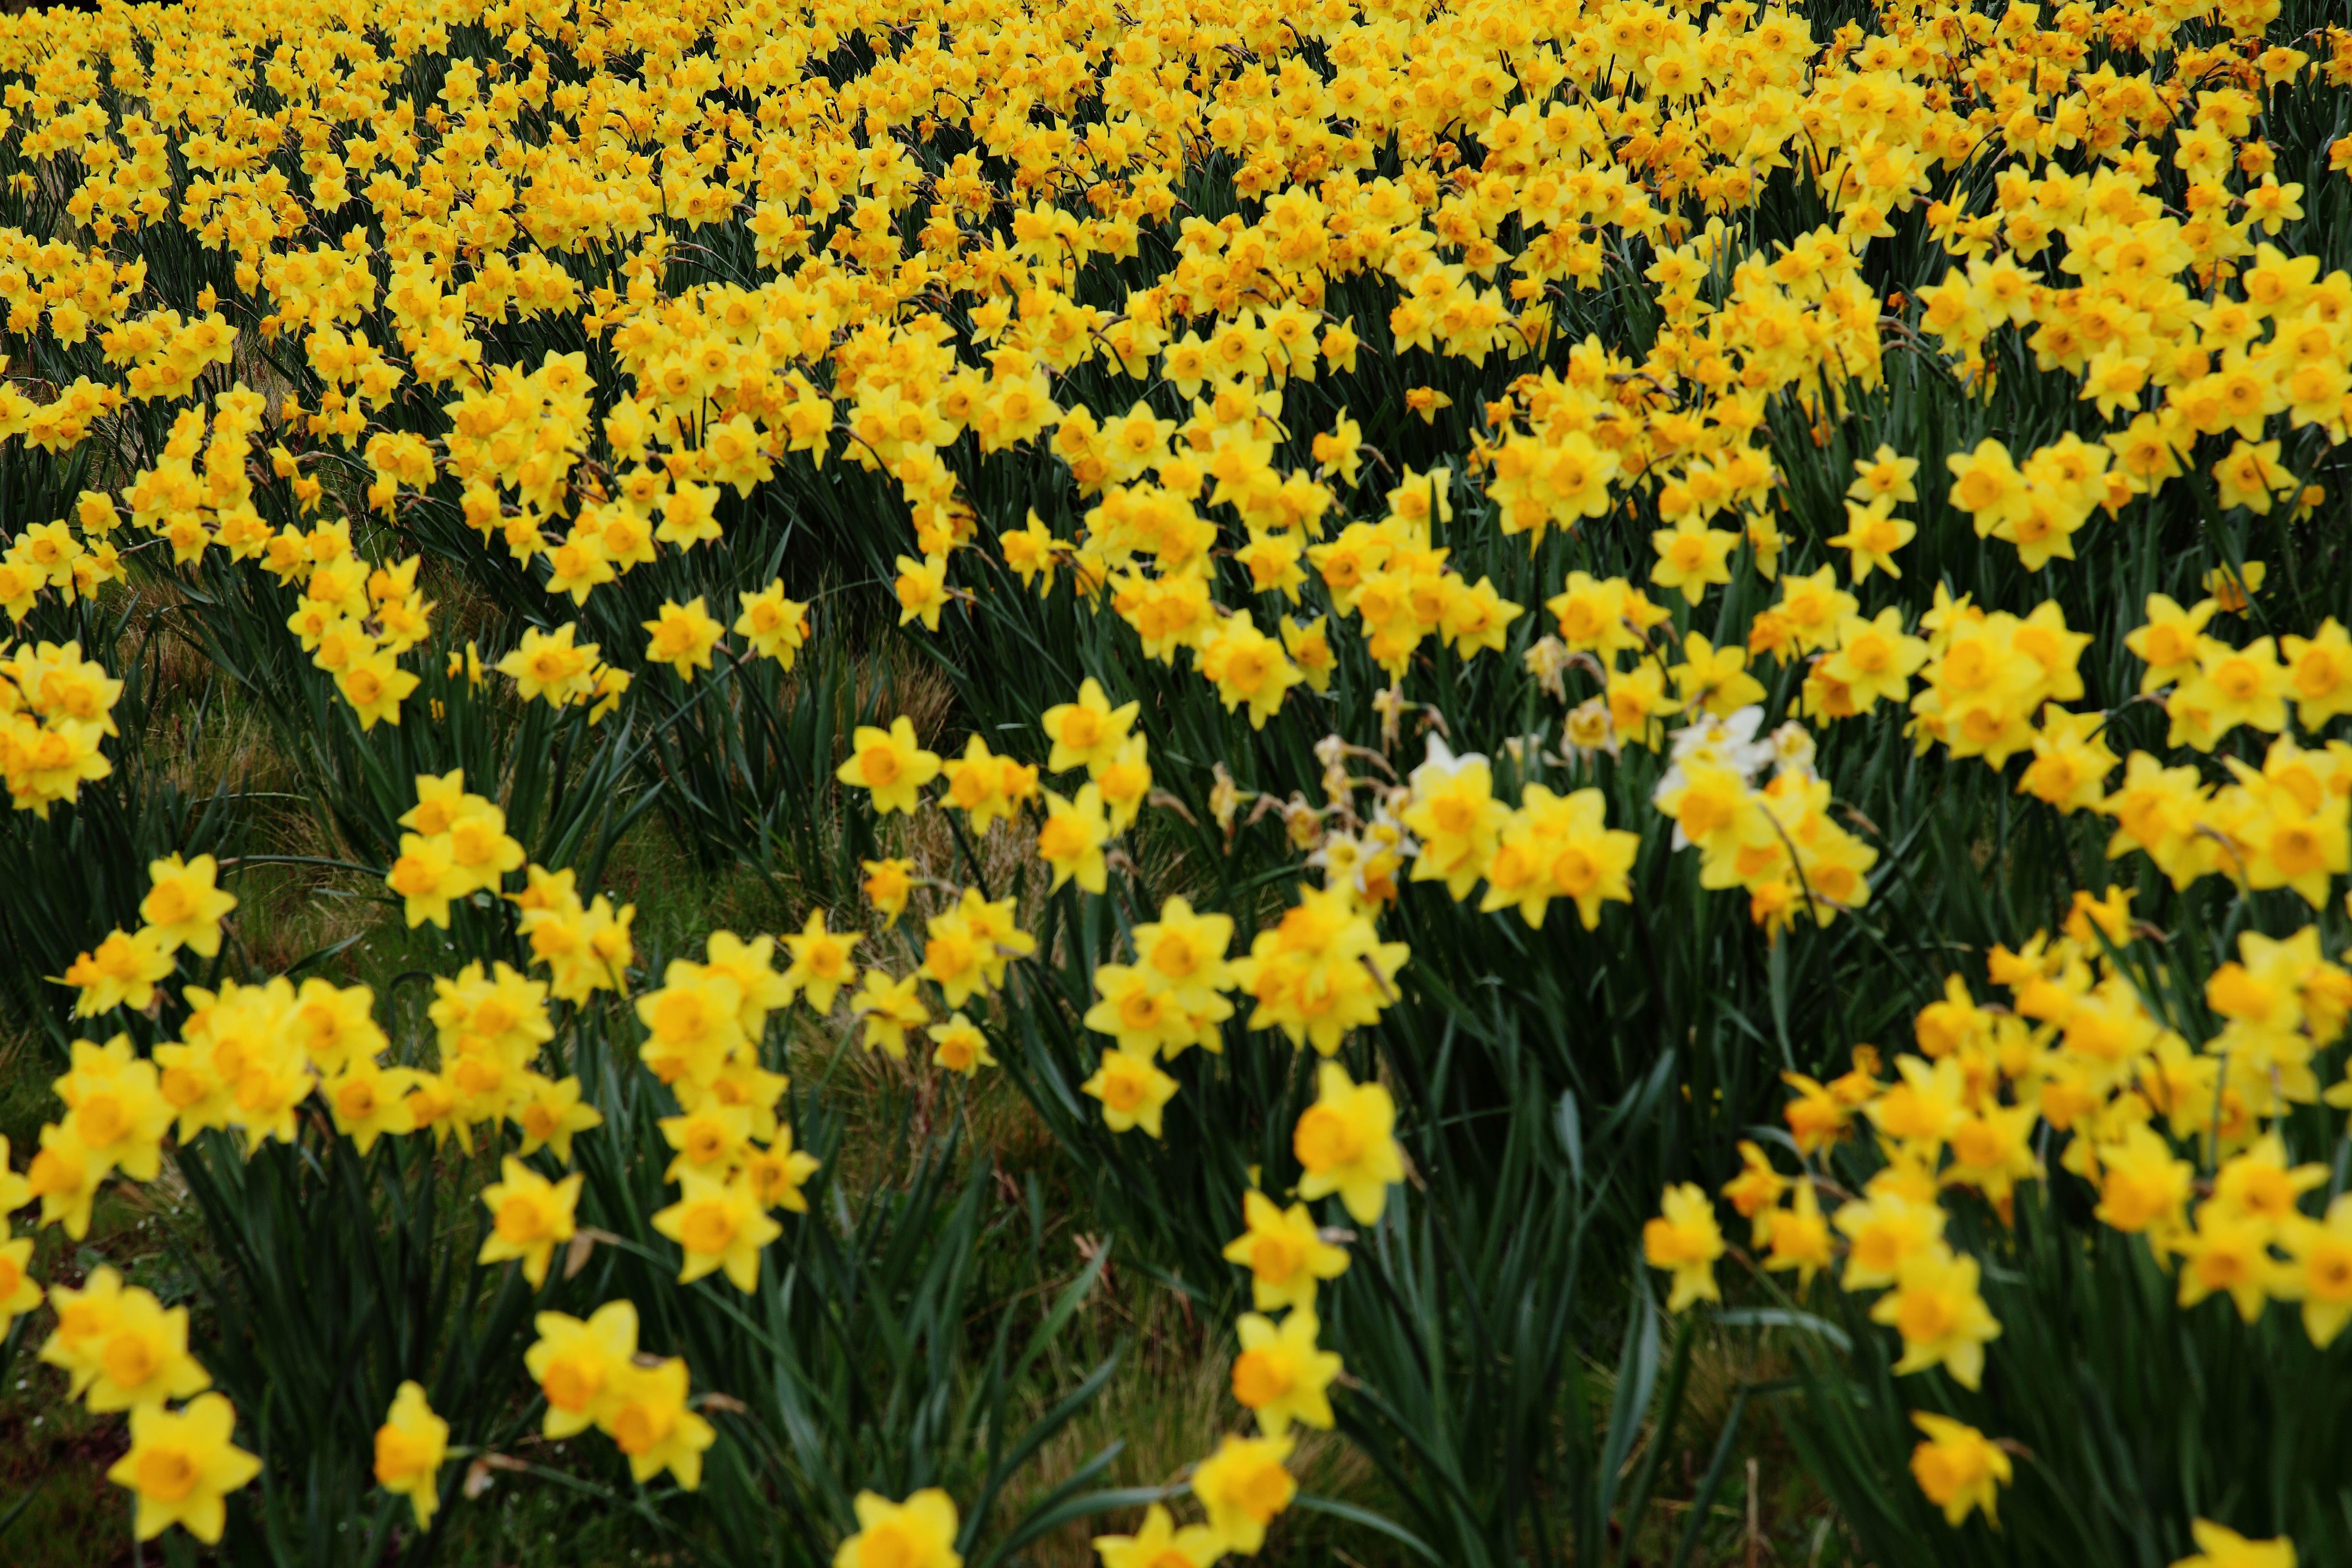 Field Of Yellow Daffodils There Must Be Several Hundred Daffodil